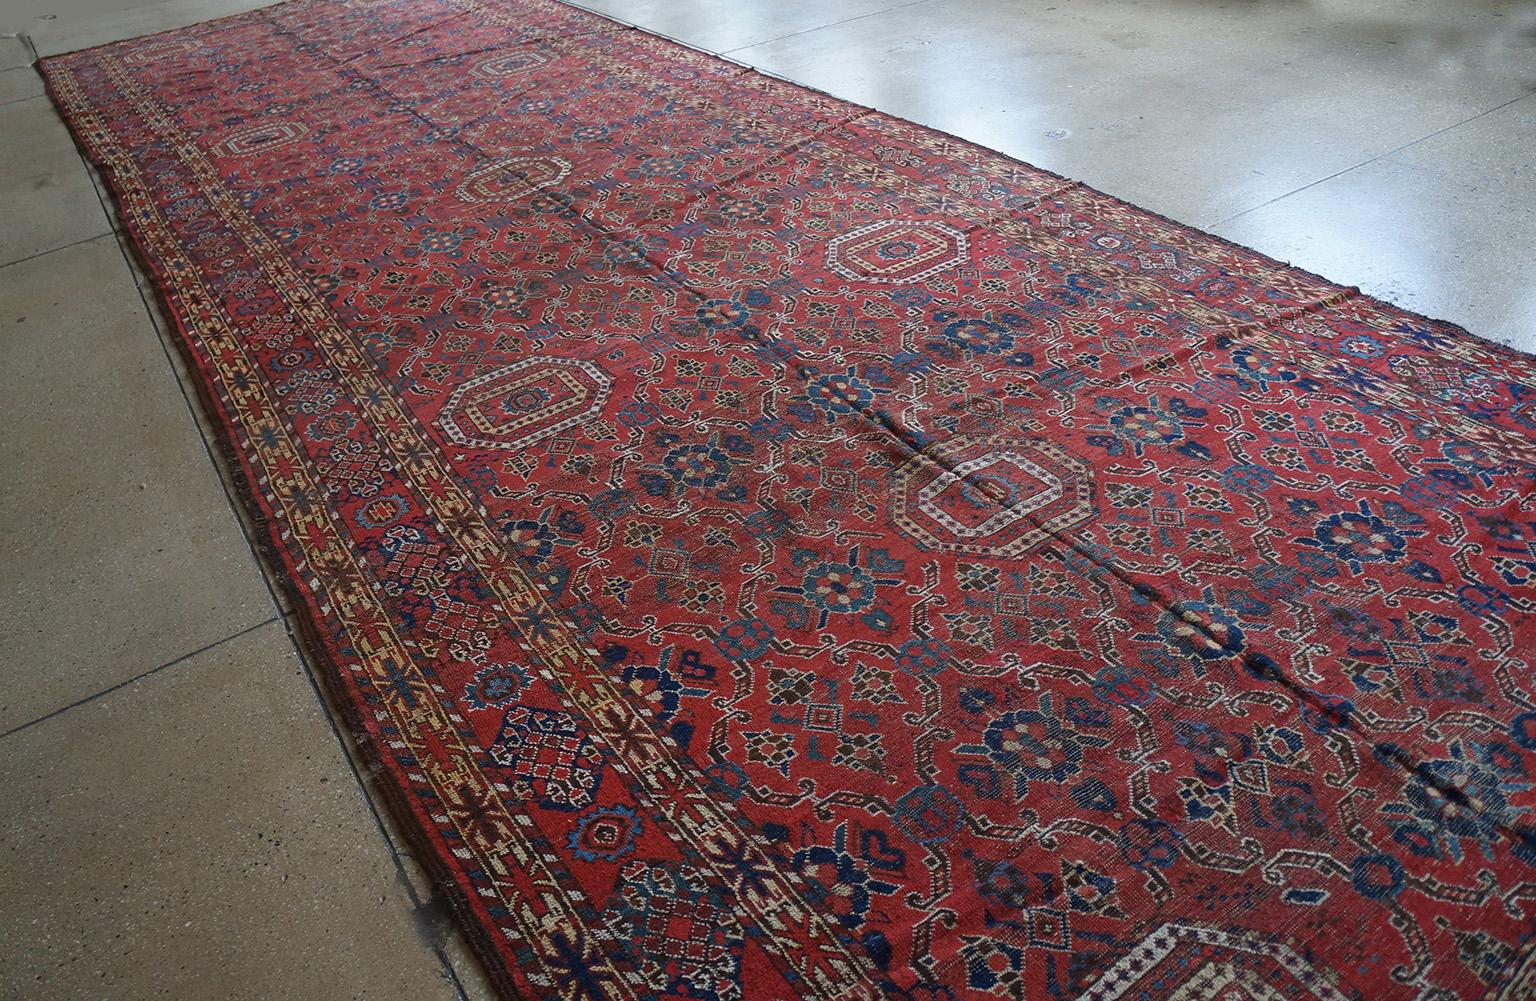 Russian Mid-19th Century Central Asian Beshir Gallery Carpet ( 6'7